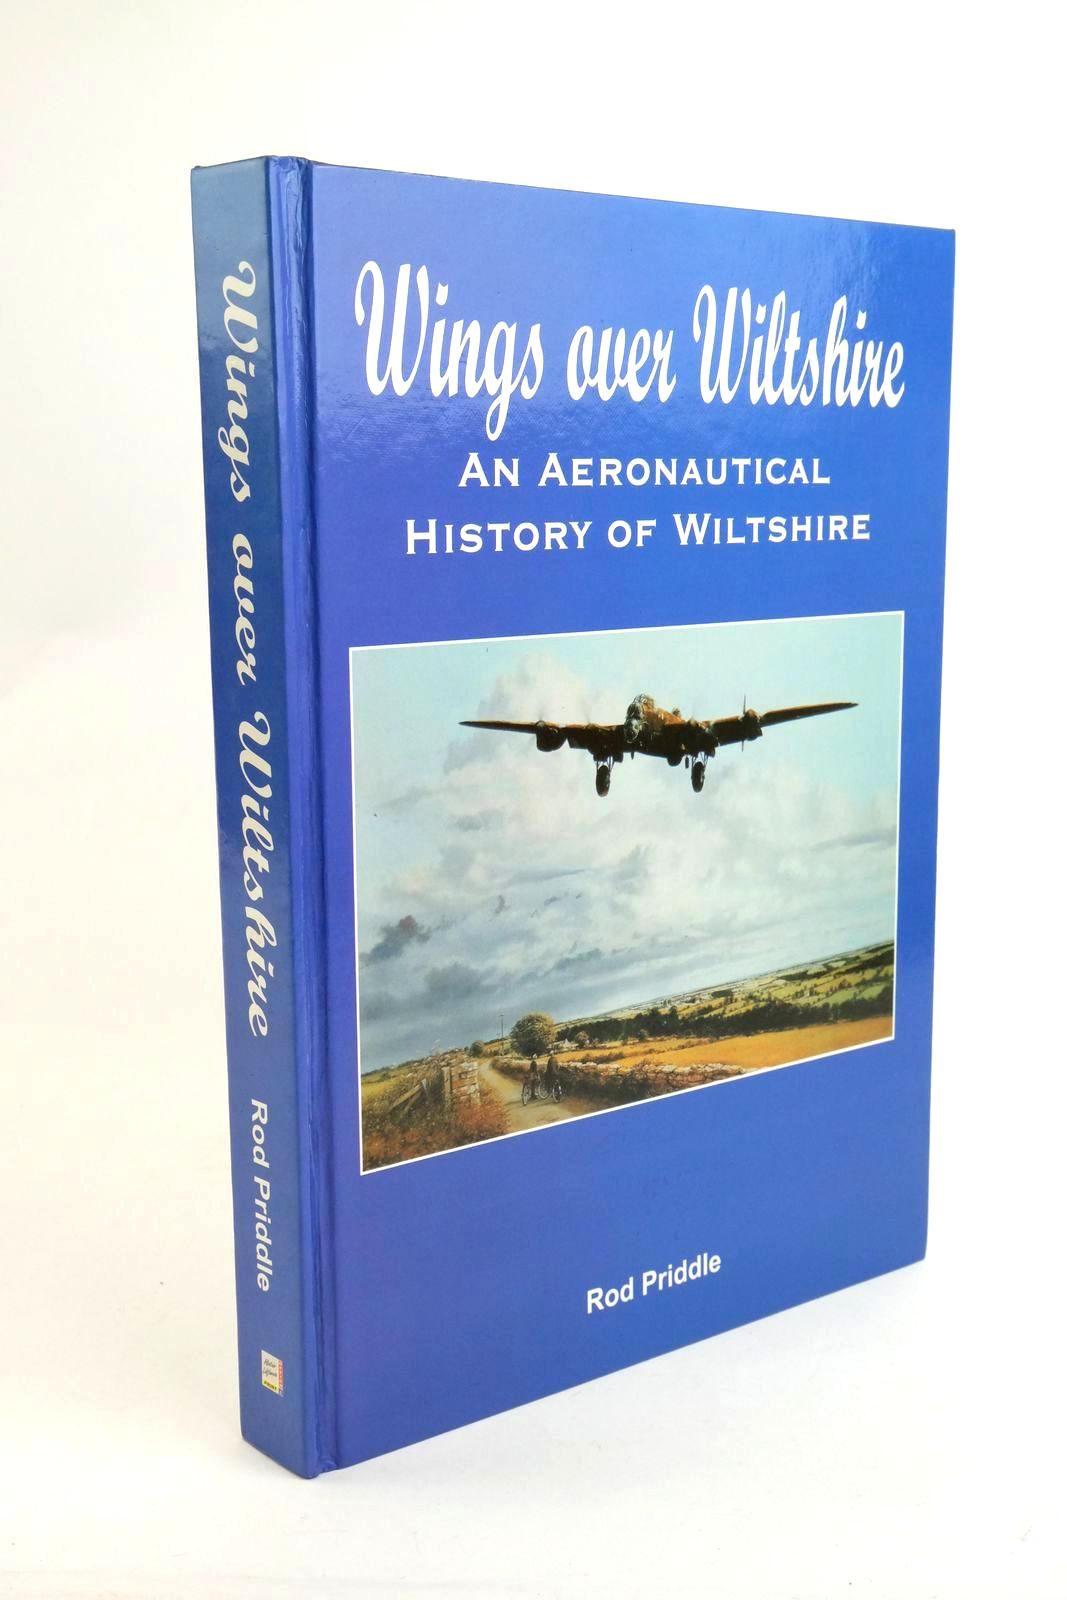 Photo of WINGS OVER WILTSHIRE written by Priddle, Rod published by ALD Design &amp; Print (STOCK CODE: 1322184)  for sale by Stella & Rose's Books